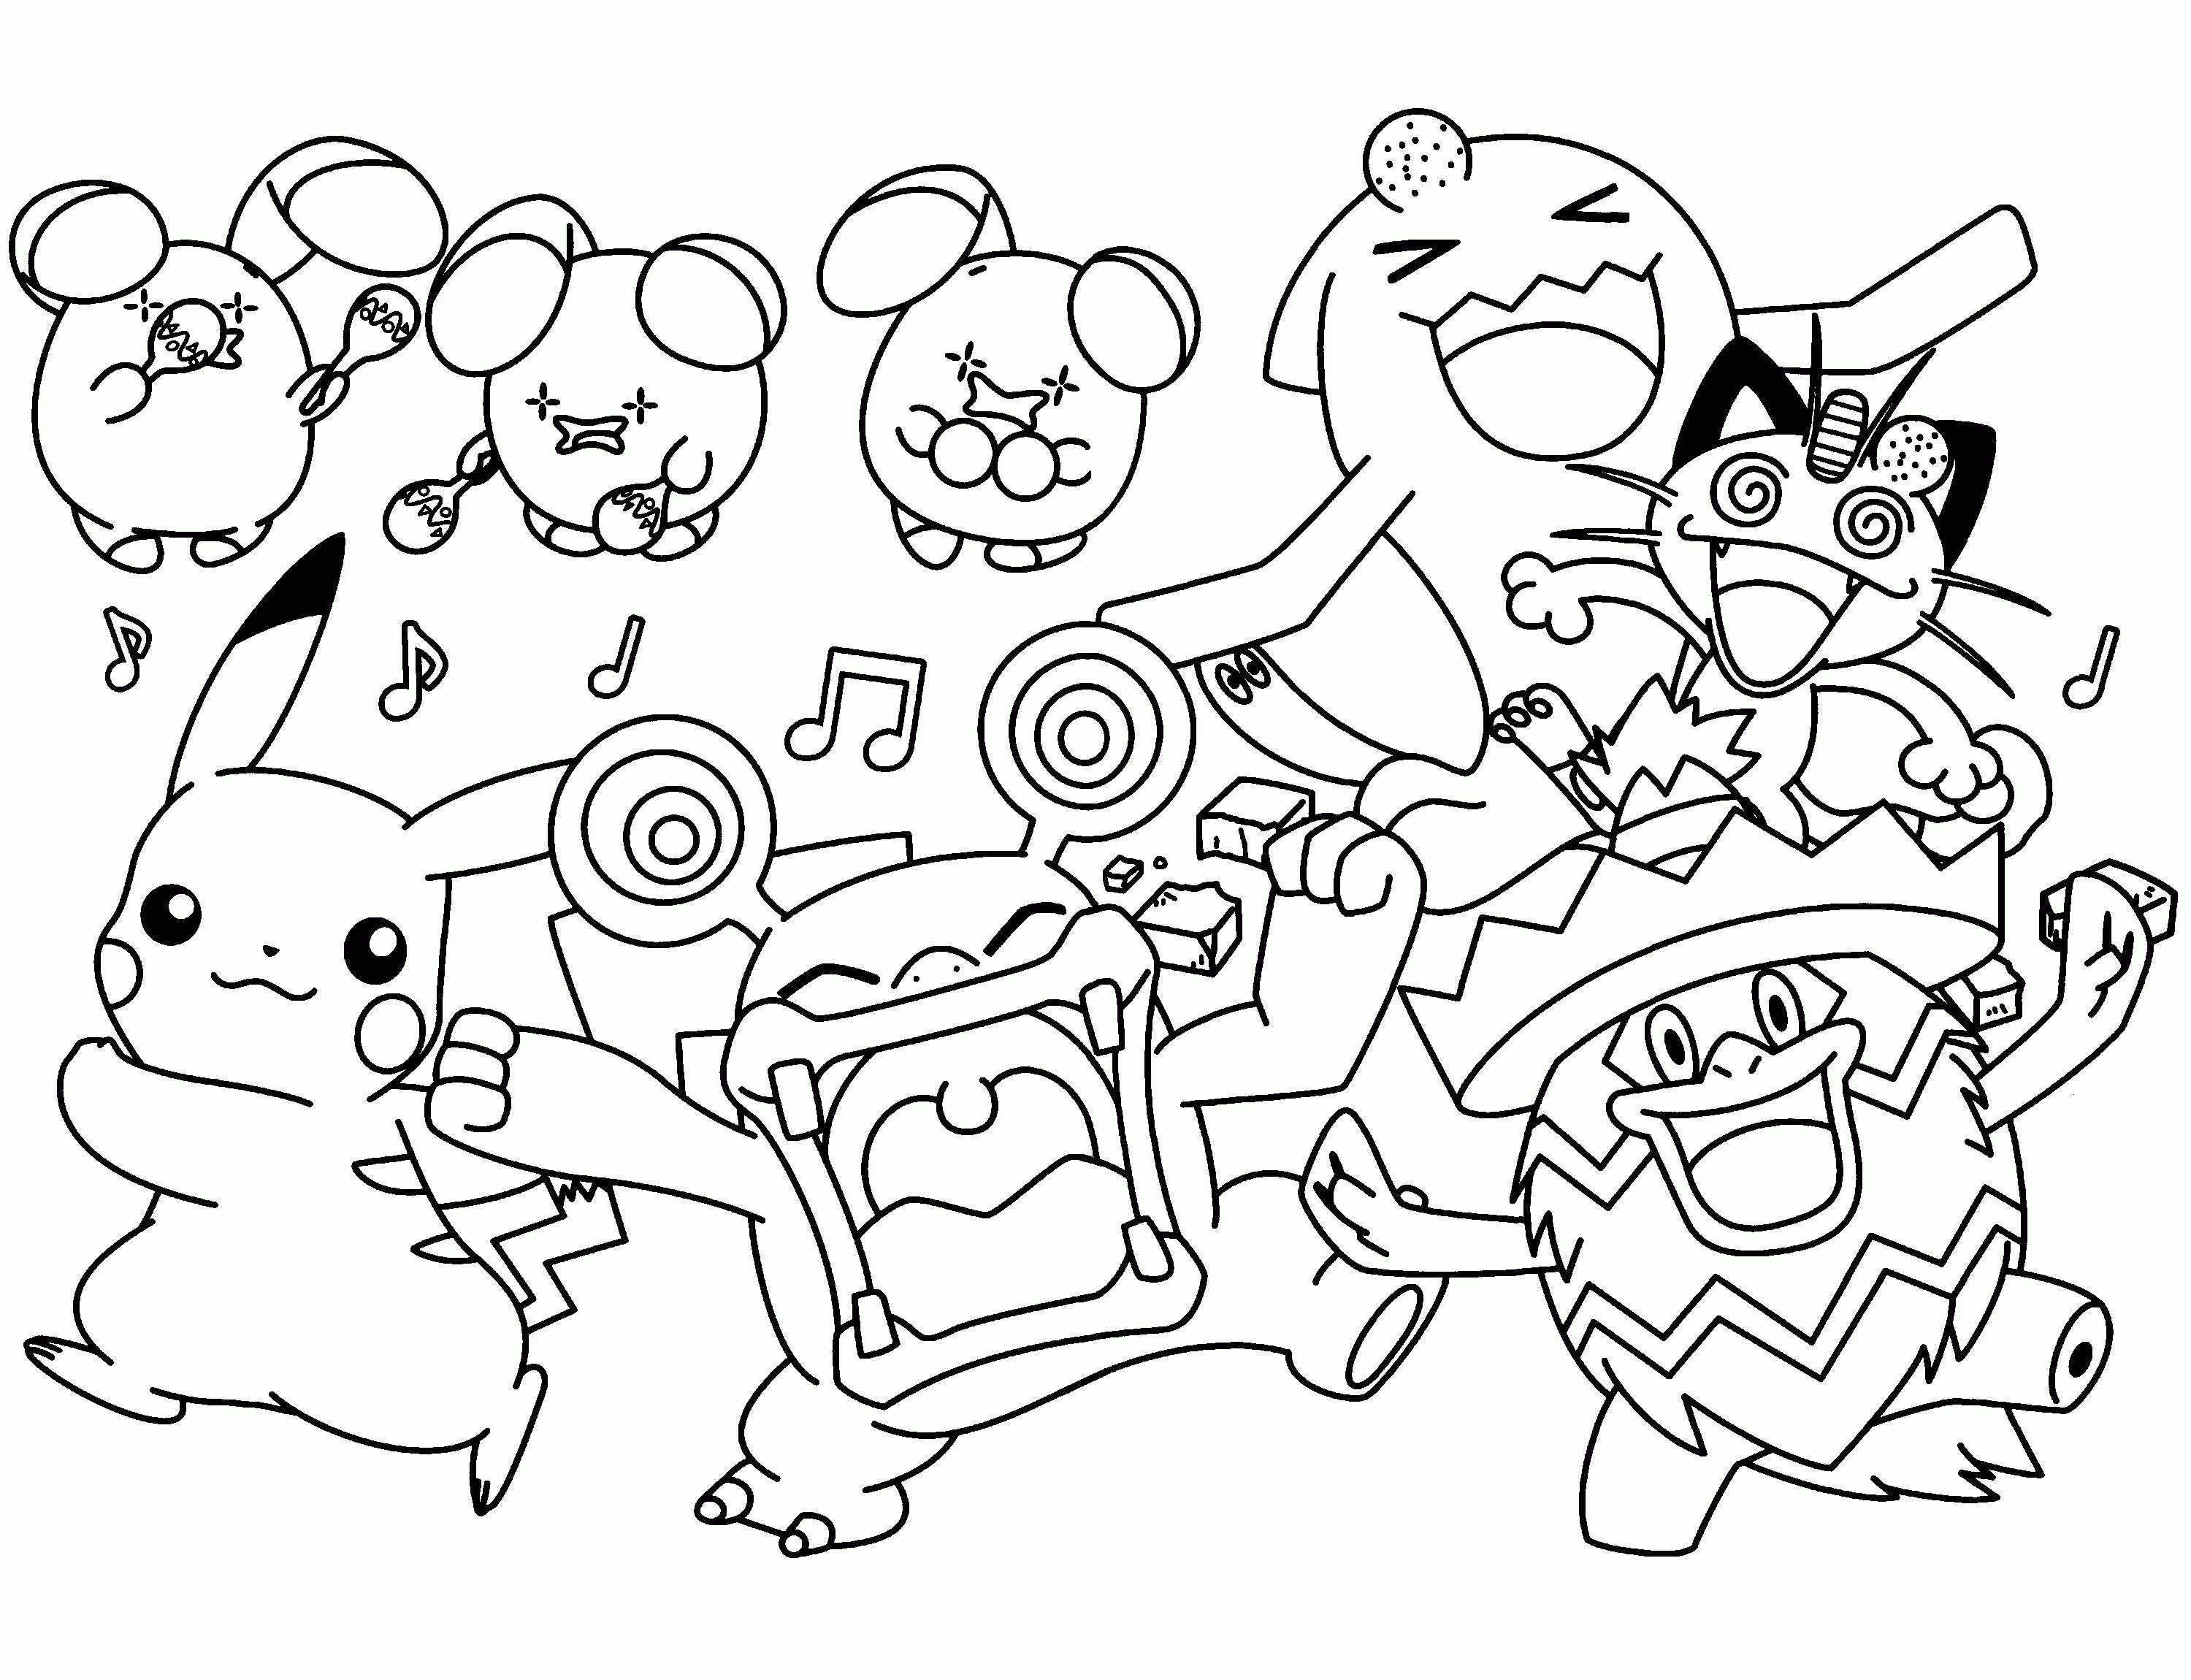 pokemon-free-to-color-for-children-all-pokemon-coloring-pages-kids